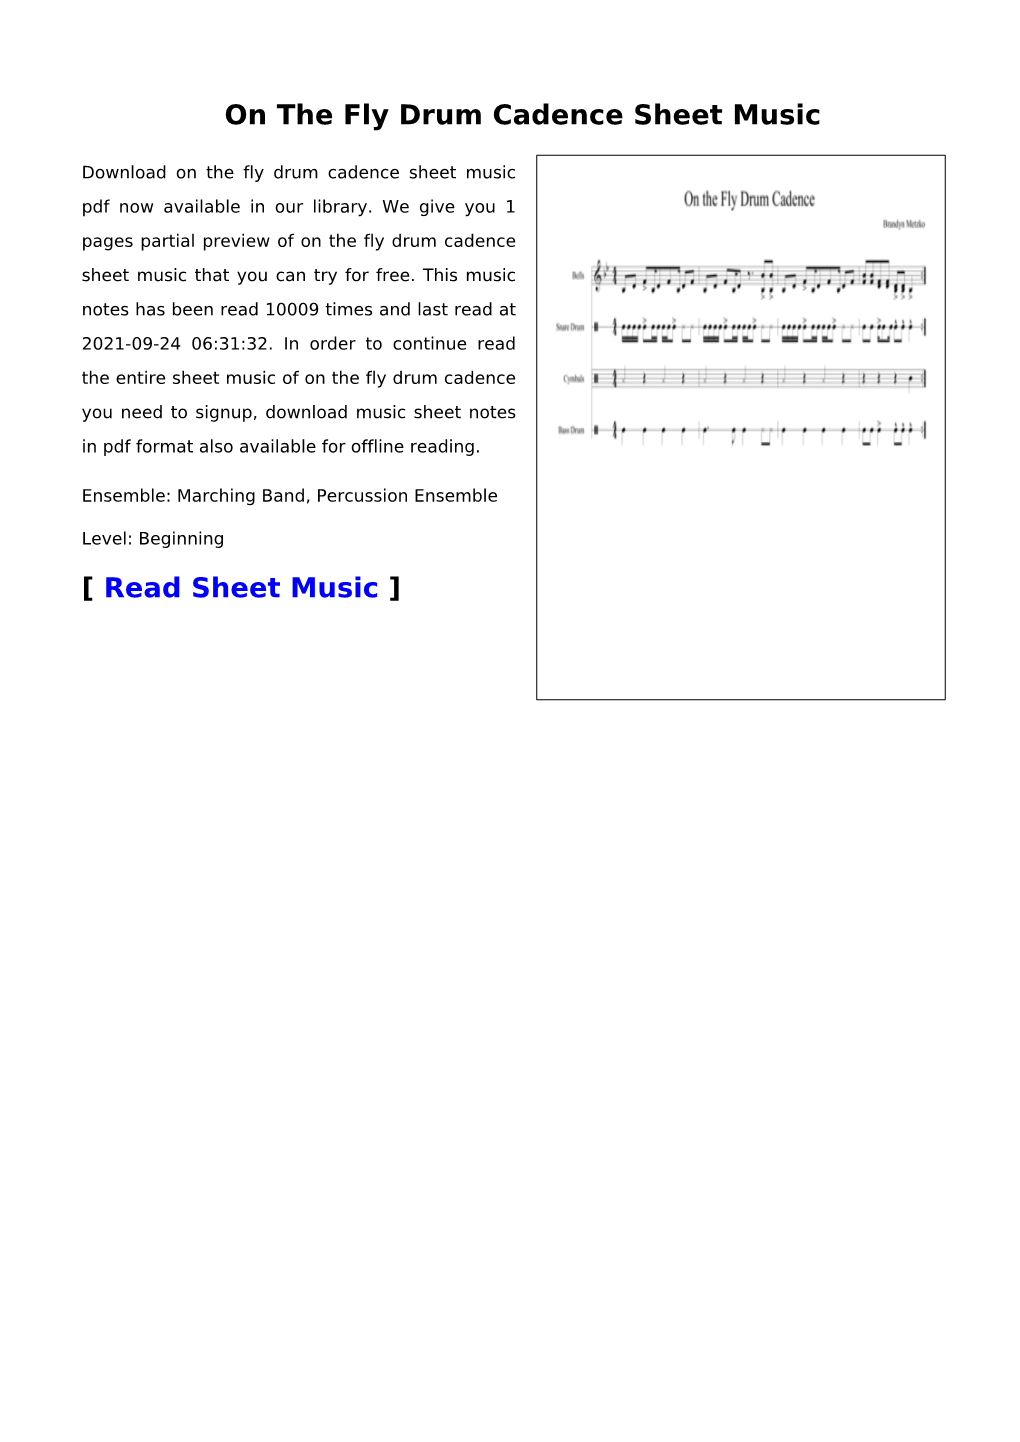 On the Fly Drum Cadence Sheet Music